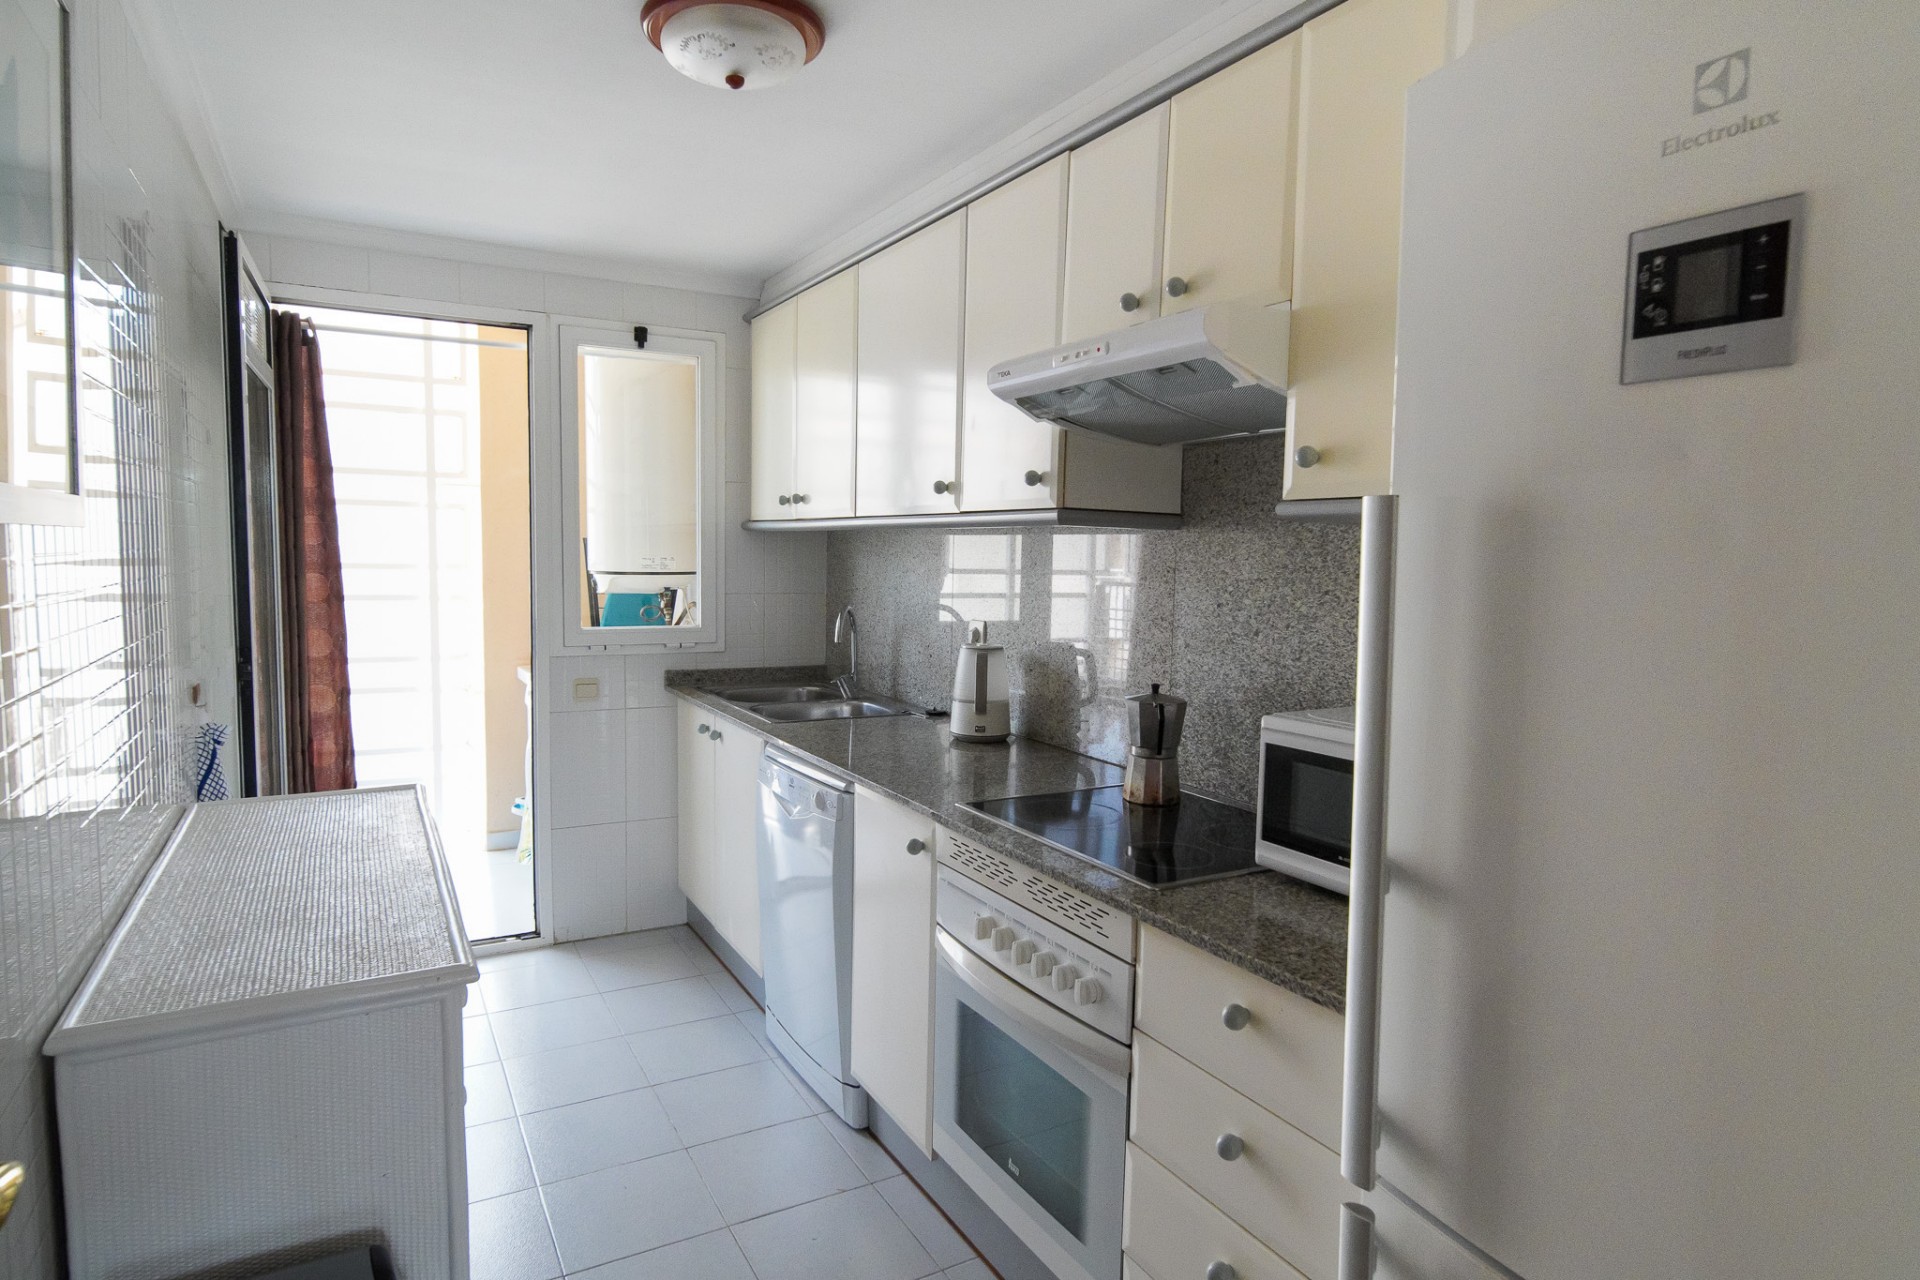 Three Bedroom Penthouse For Sale In Javea's Arenal Beach